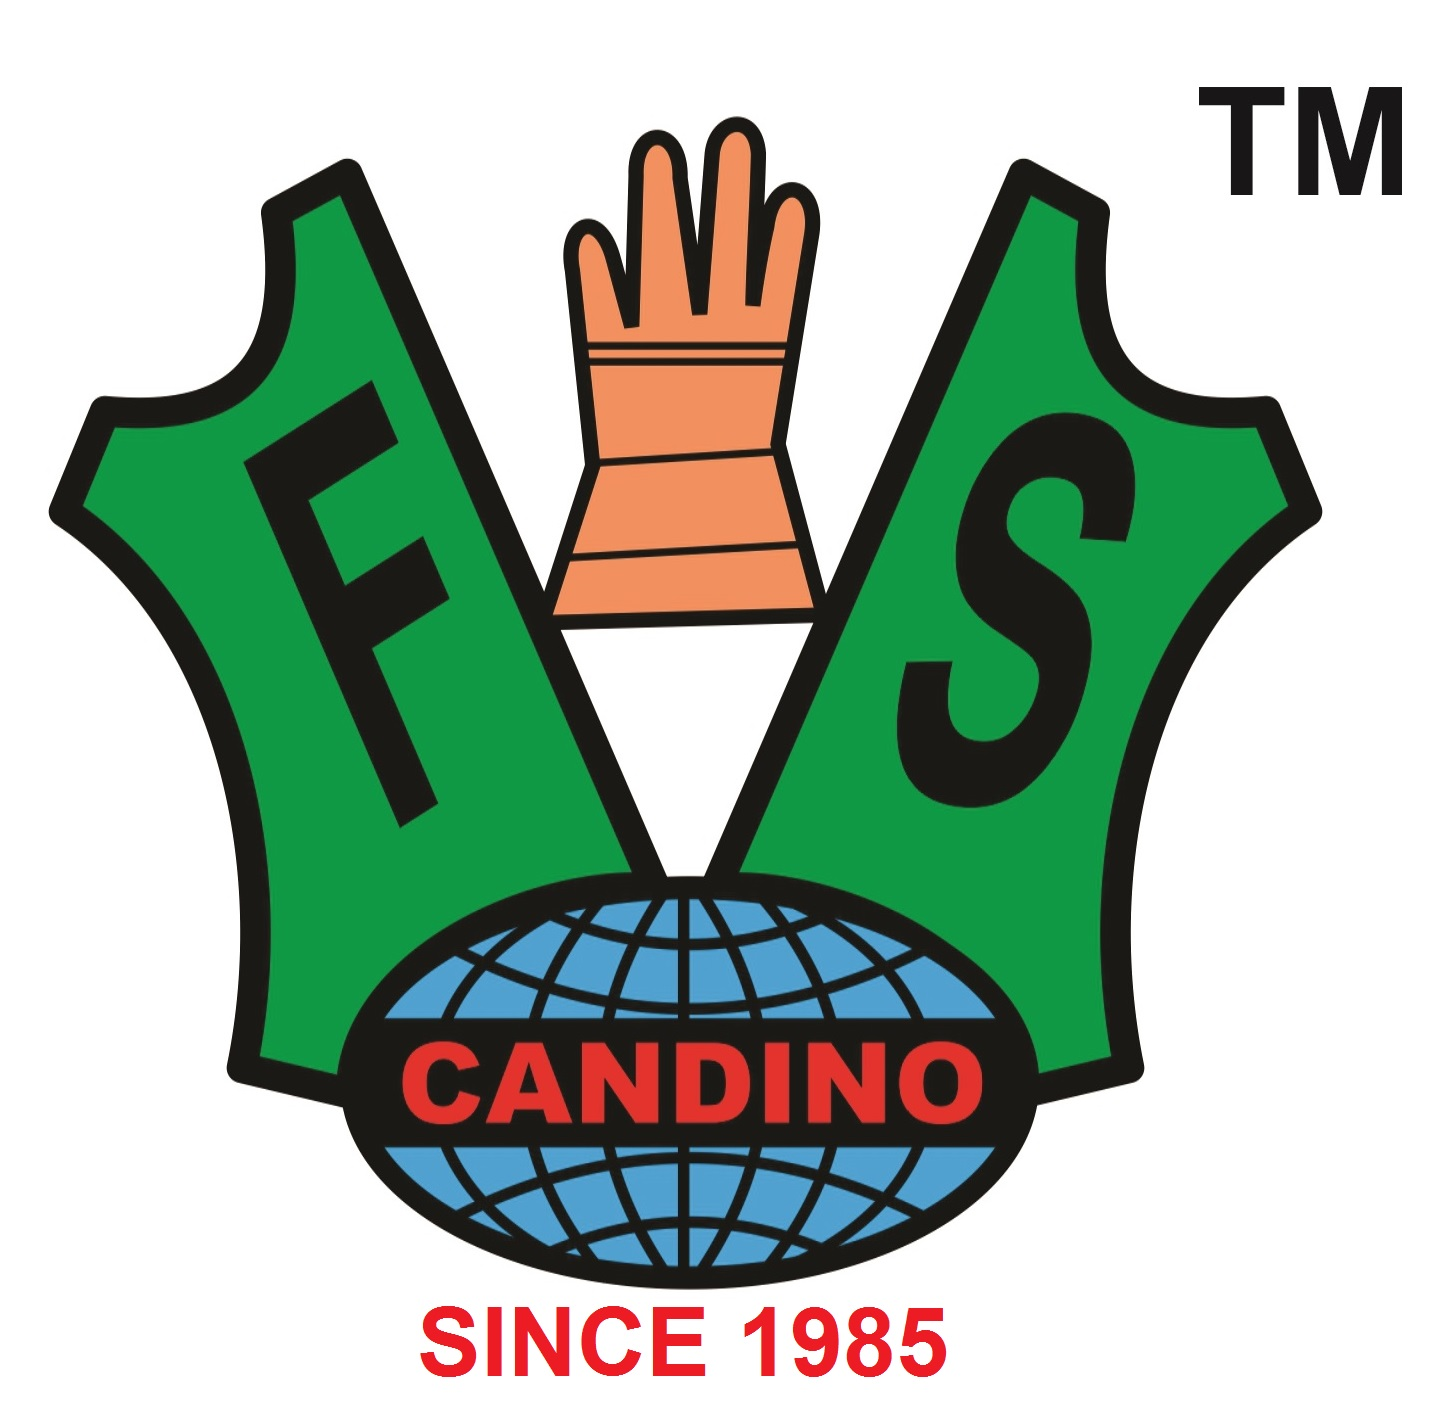 Media Management | F.S. Candino Industries